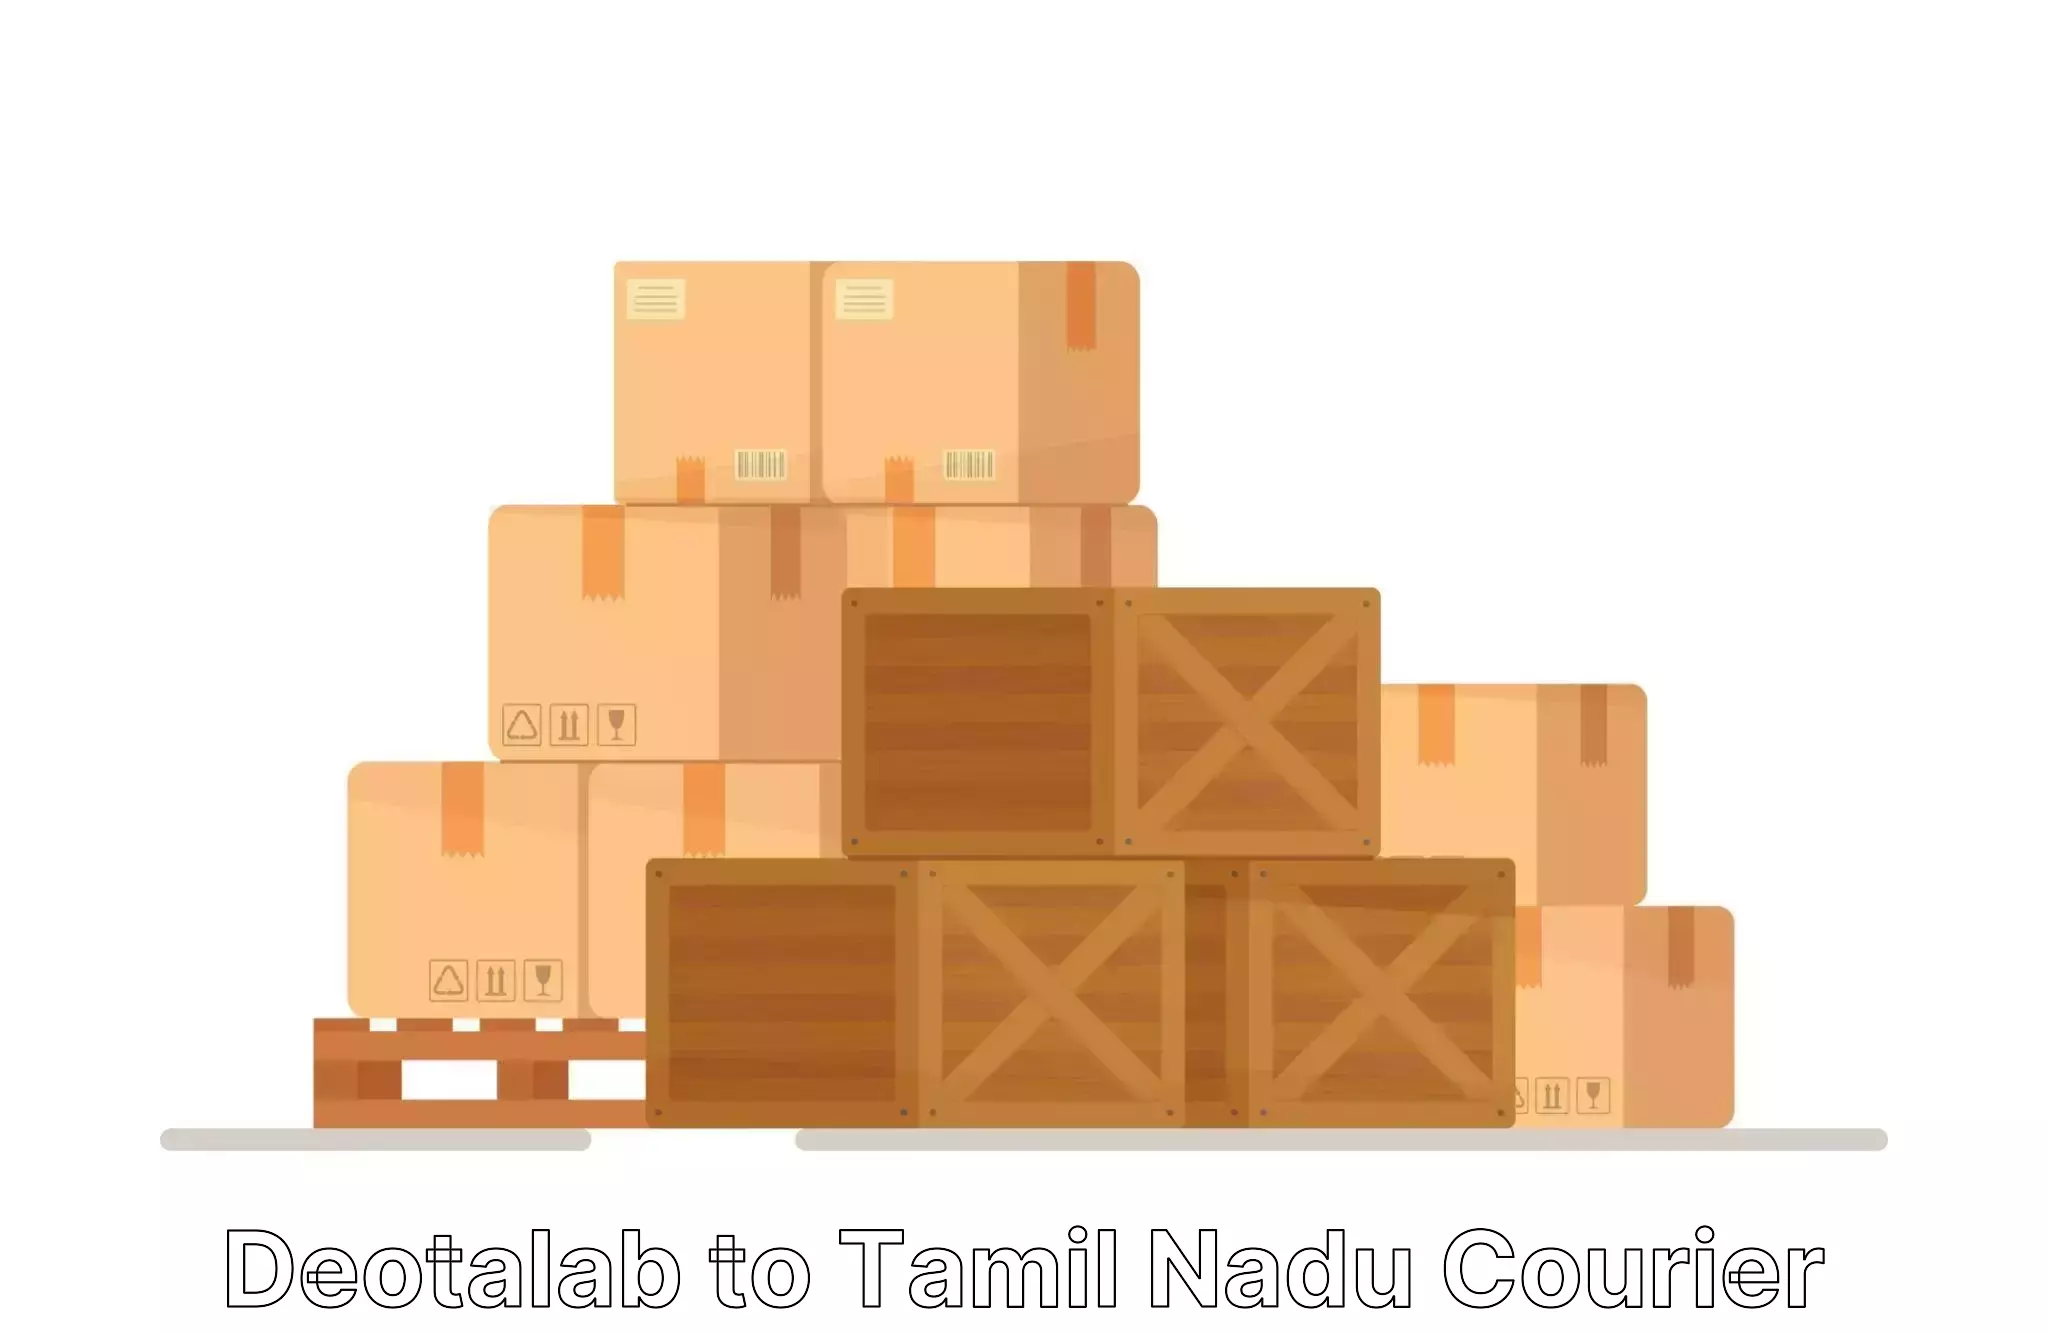 Hassle-free relocation Deotalab to Tamil Nadu